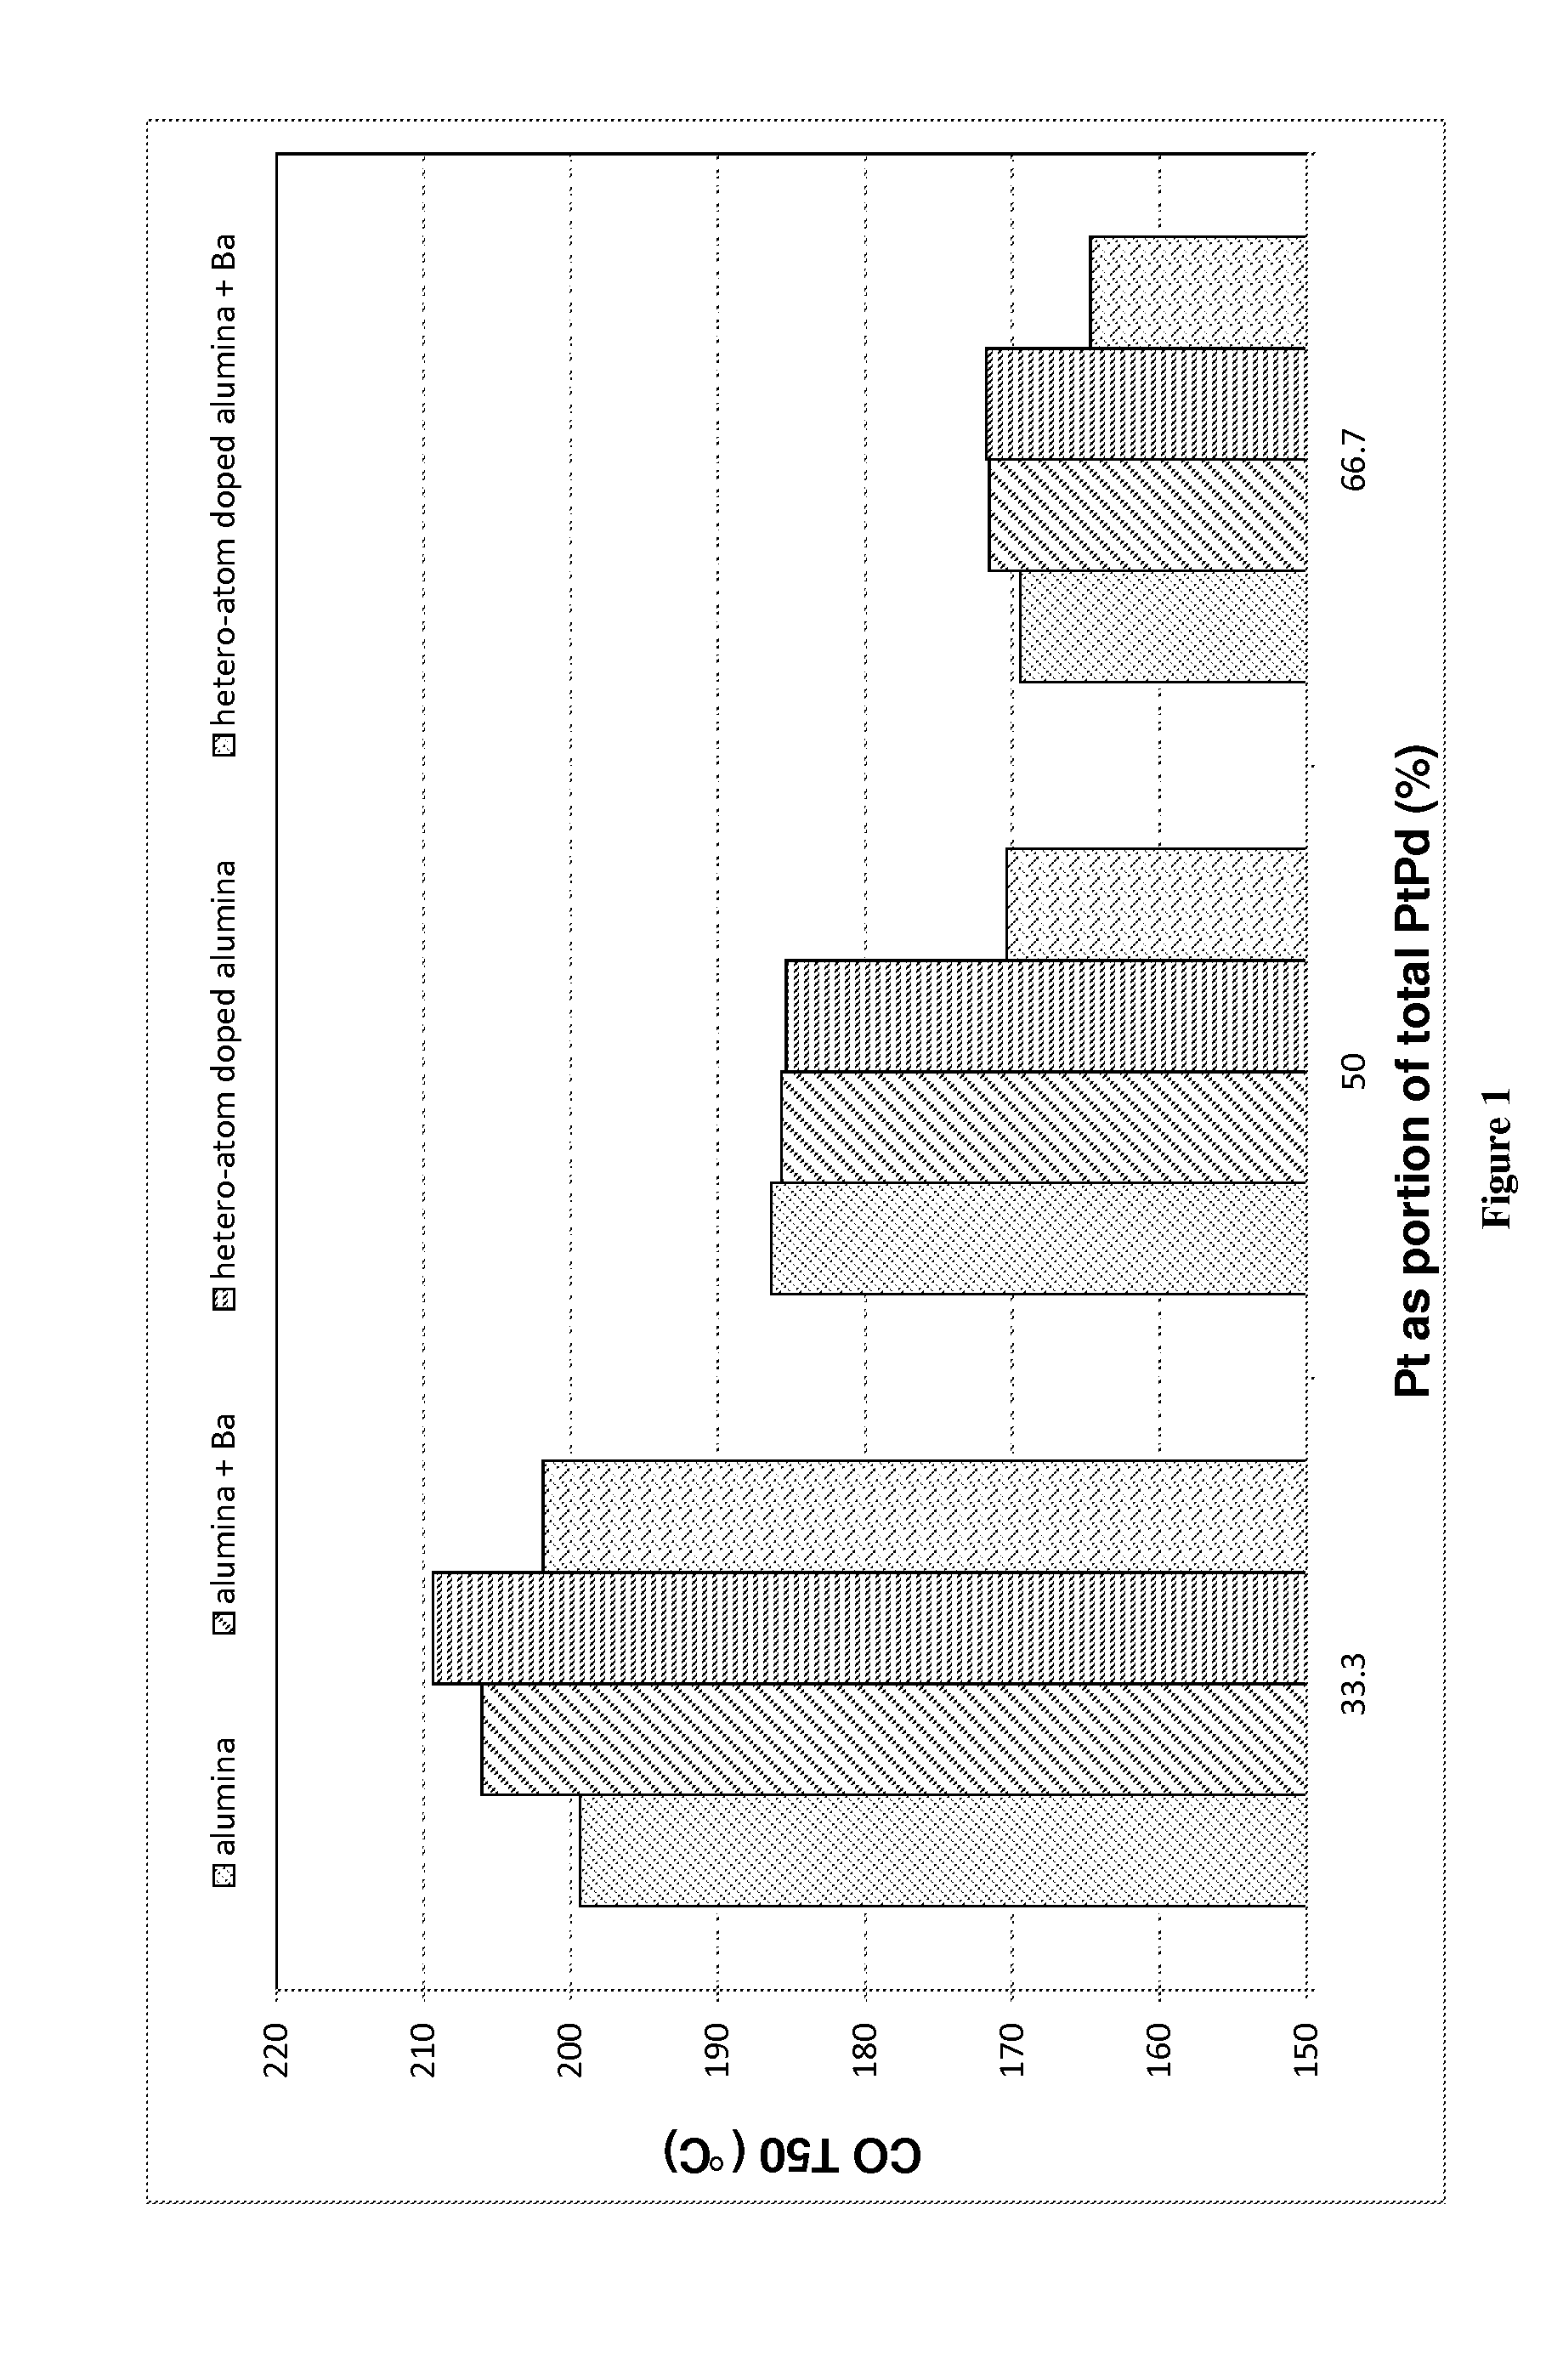 Oxidation Catalyst for Treating the Exhaust Gas of a Compression Ignition Engine